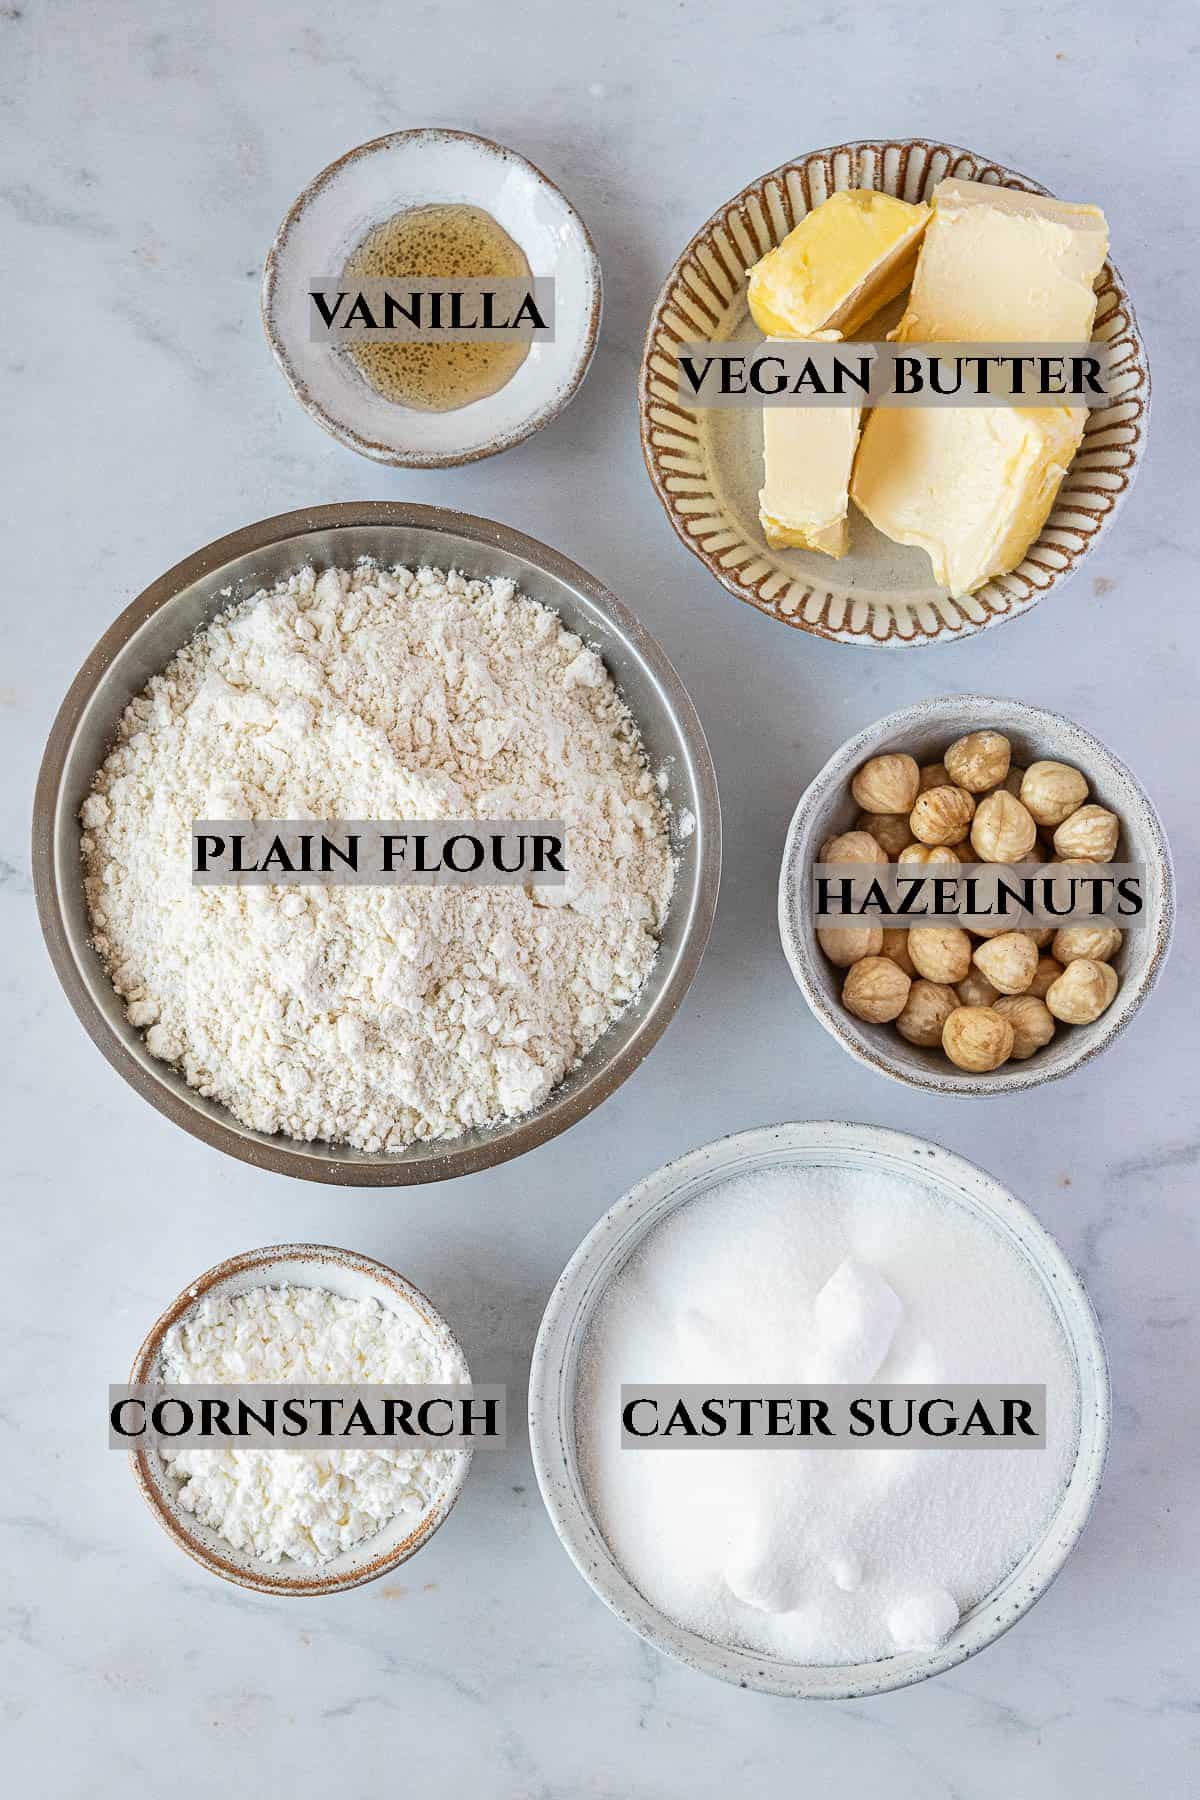 A photo of the ingredients needed to make hazelnut shortbread, with labels.